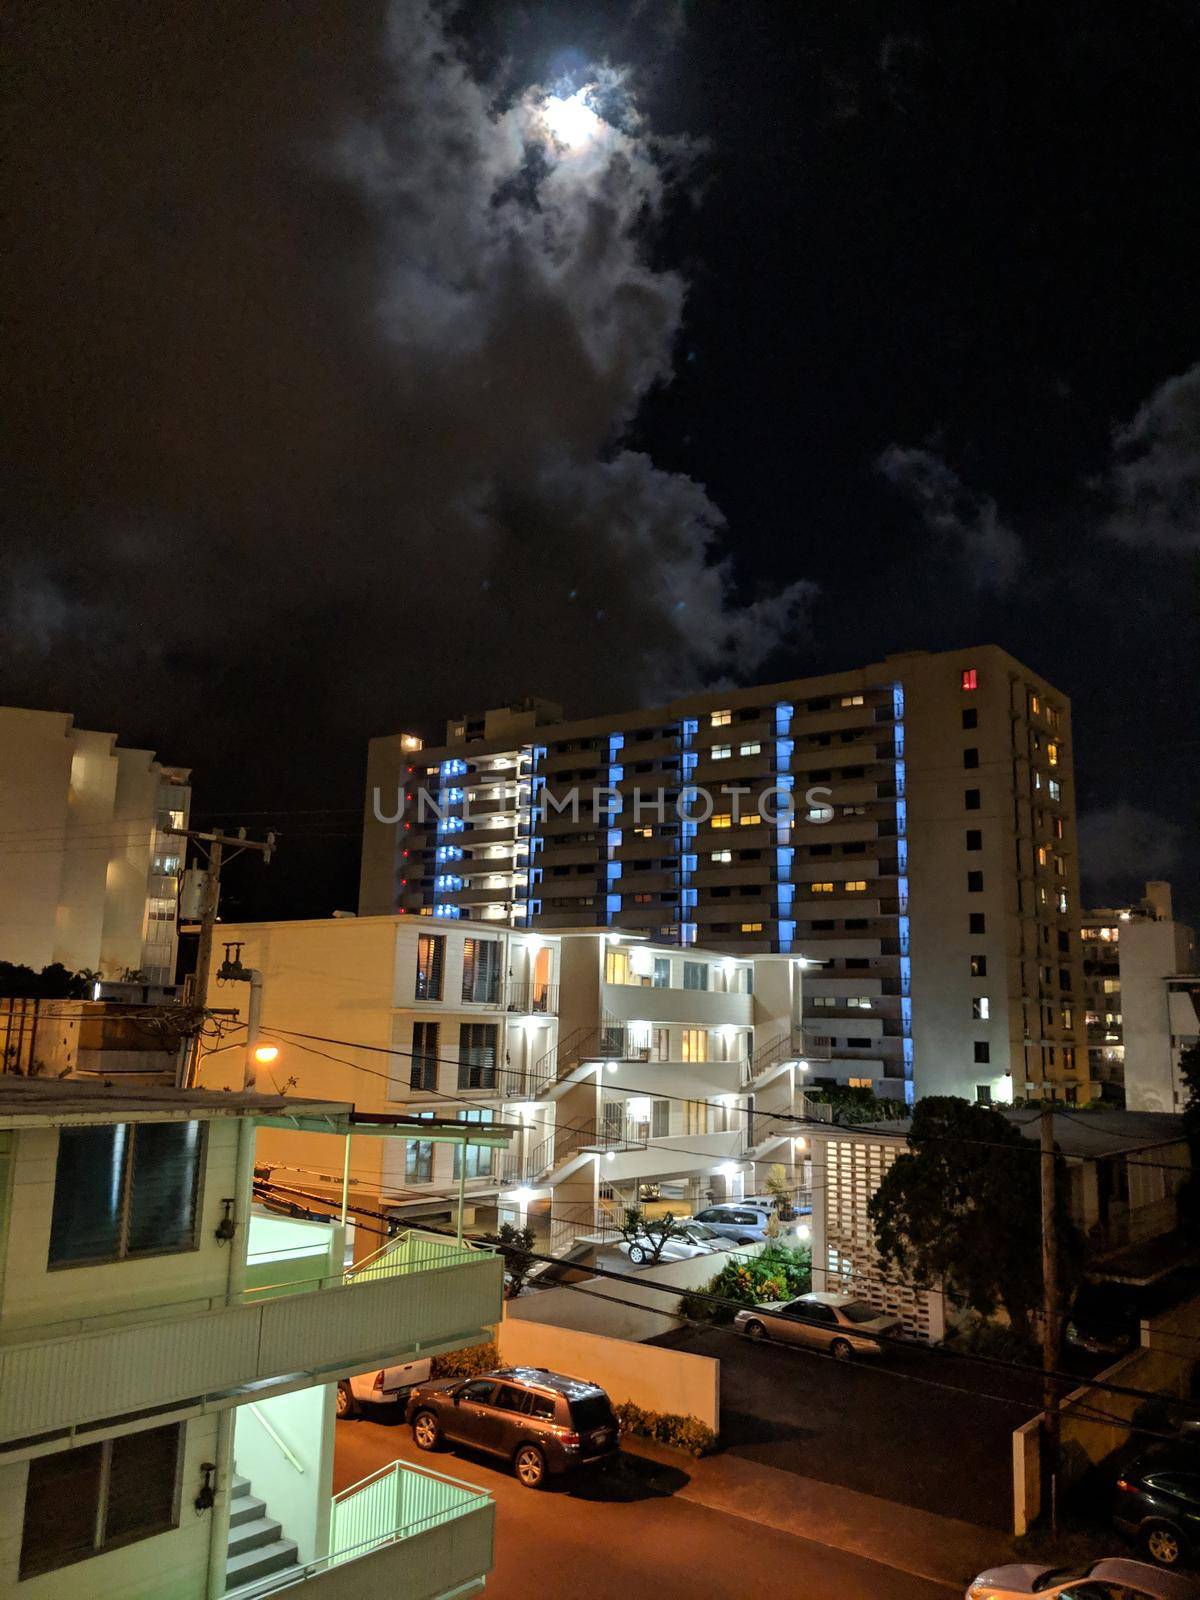 Full moon behind the clouds in Makiki, and Honolulu Cityscape high up during the evening with houses and modern highrises, and other small buildings.